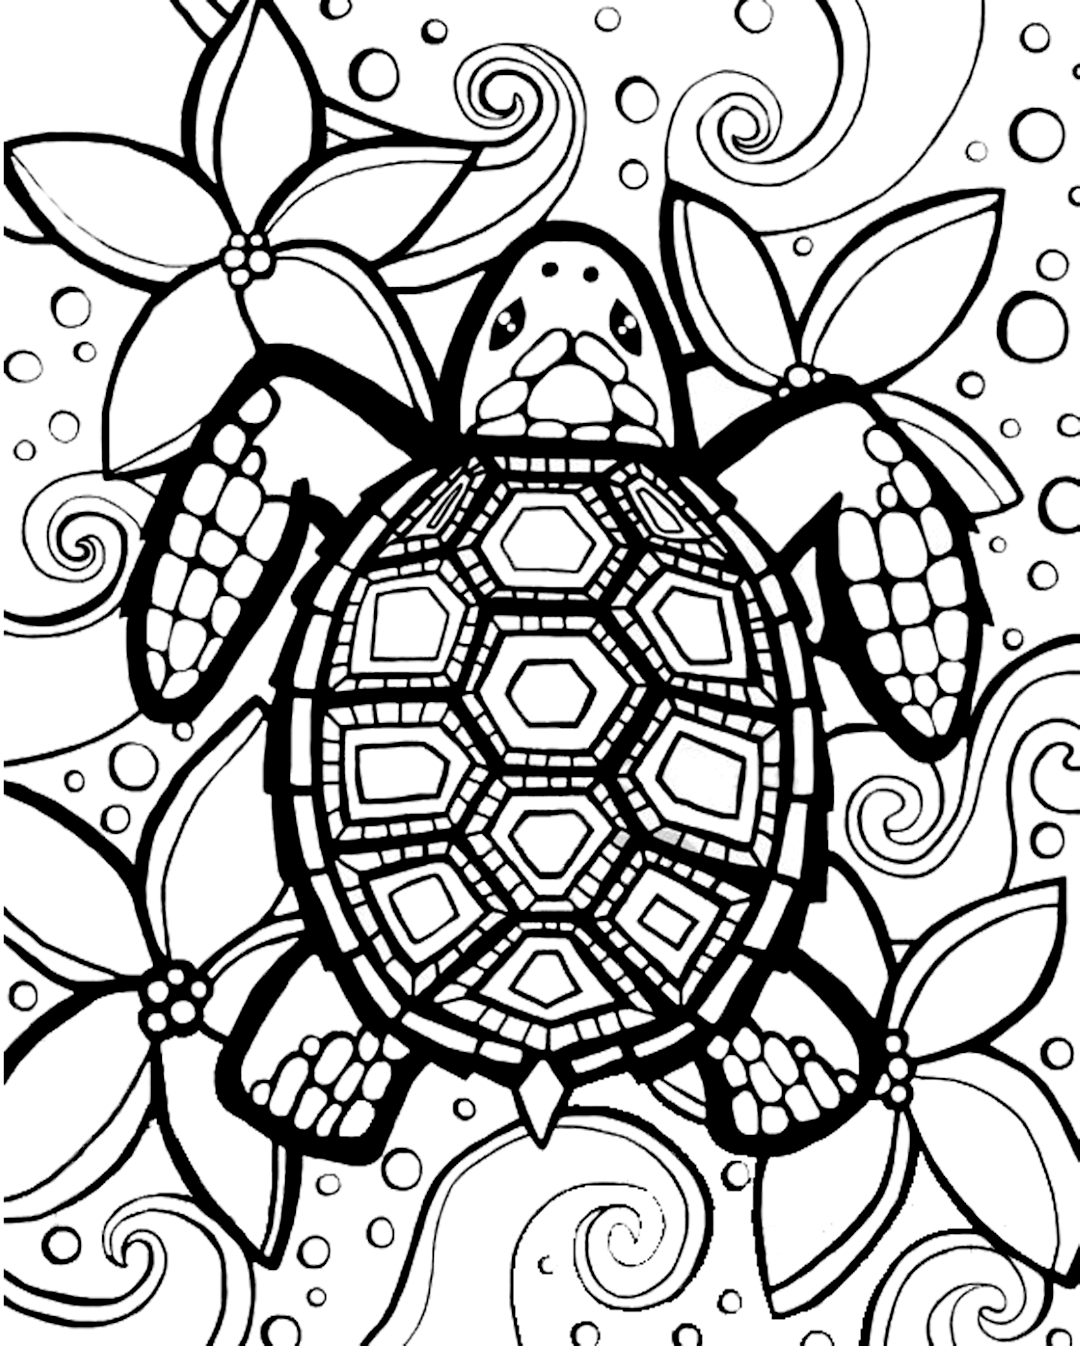 Sea Turtle Coloring Page For Adults2